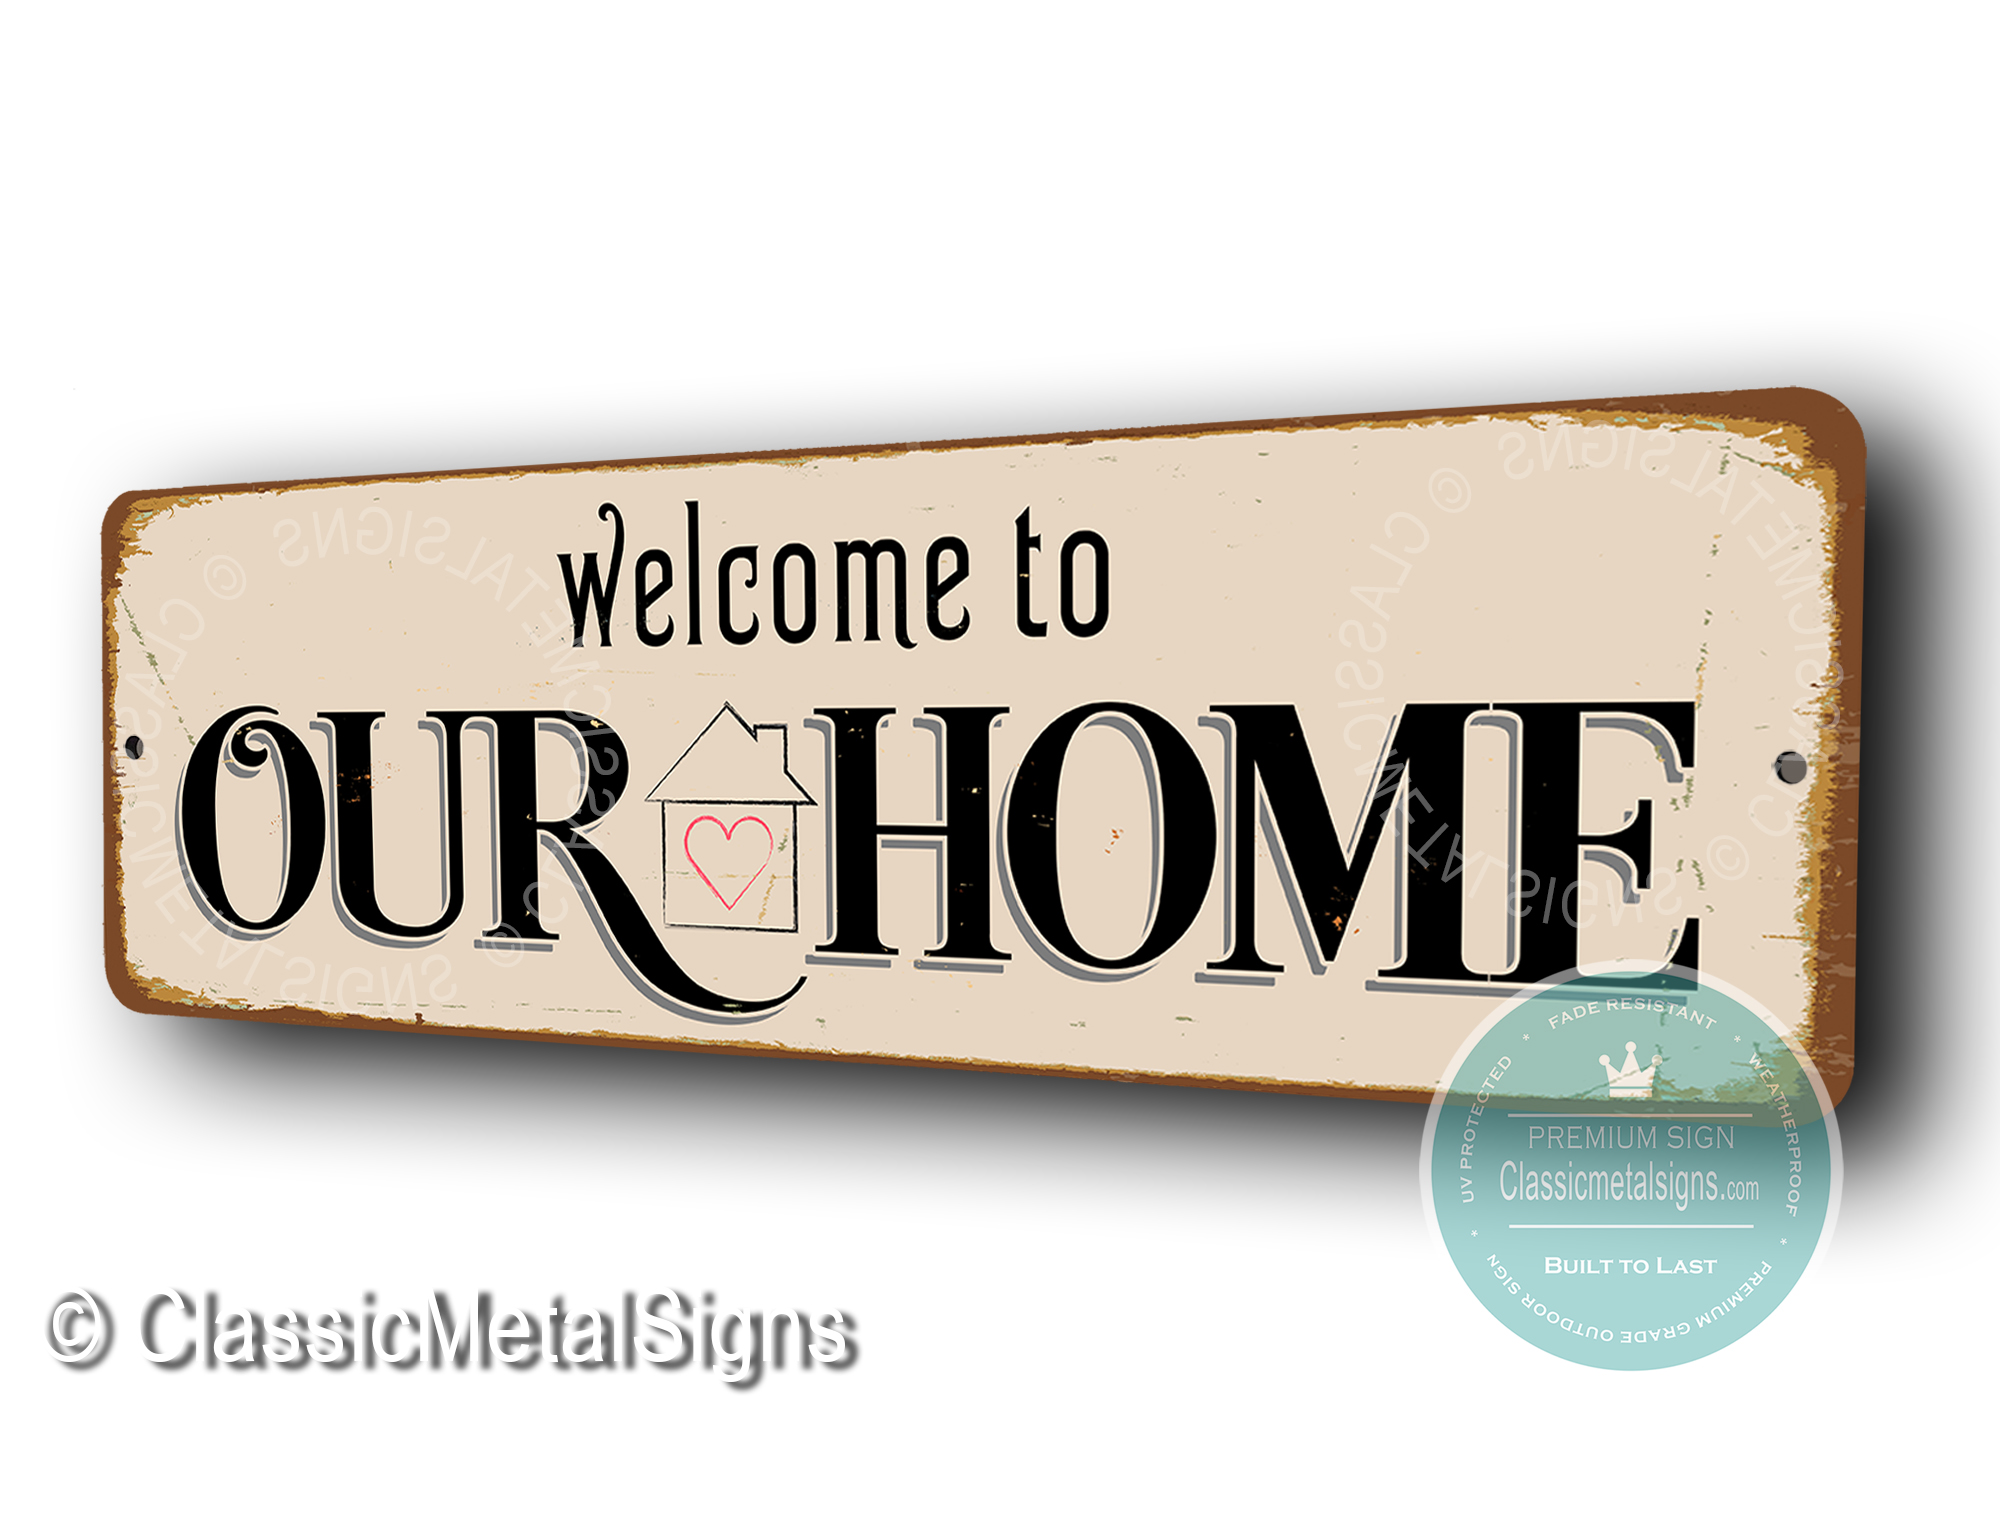 Welcome to our home signs